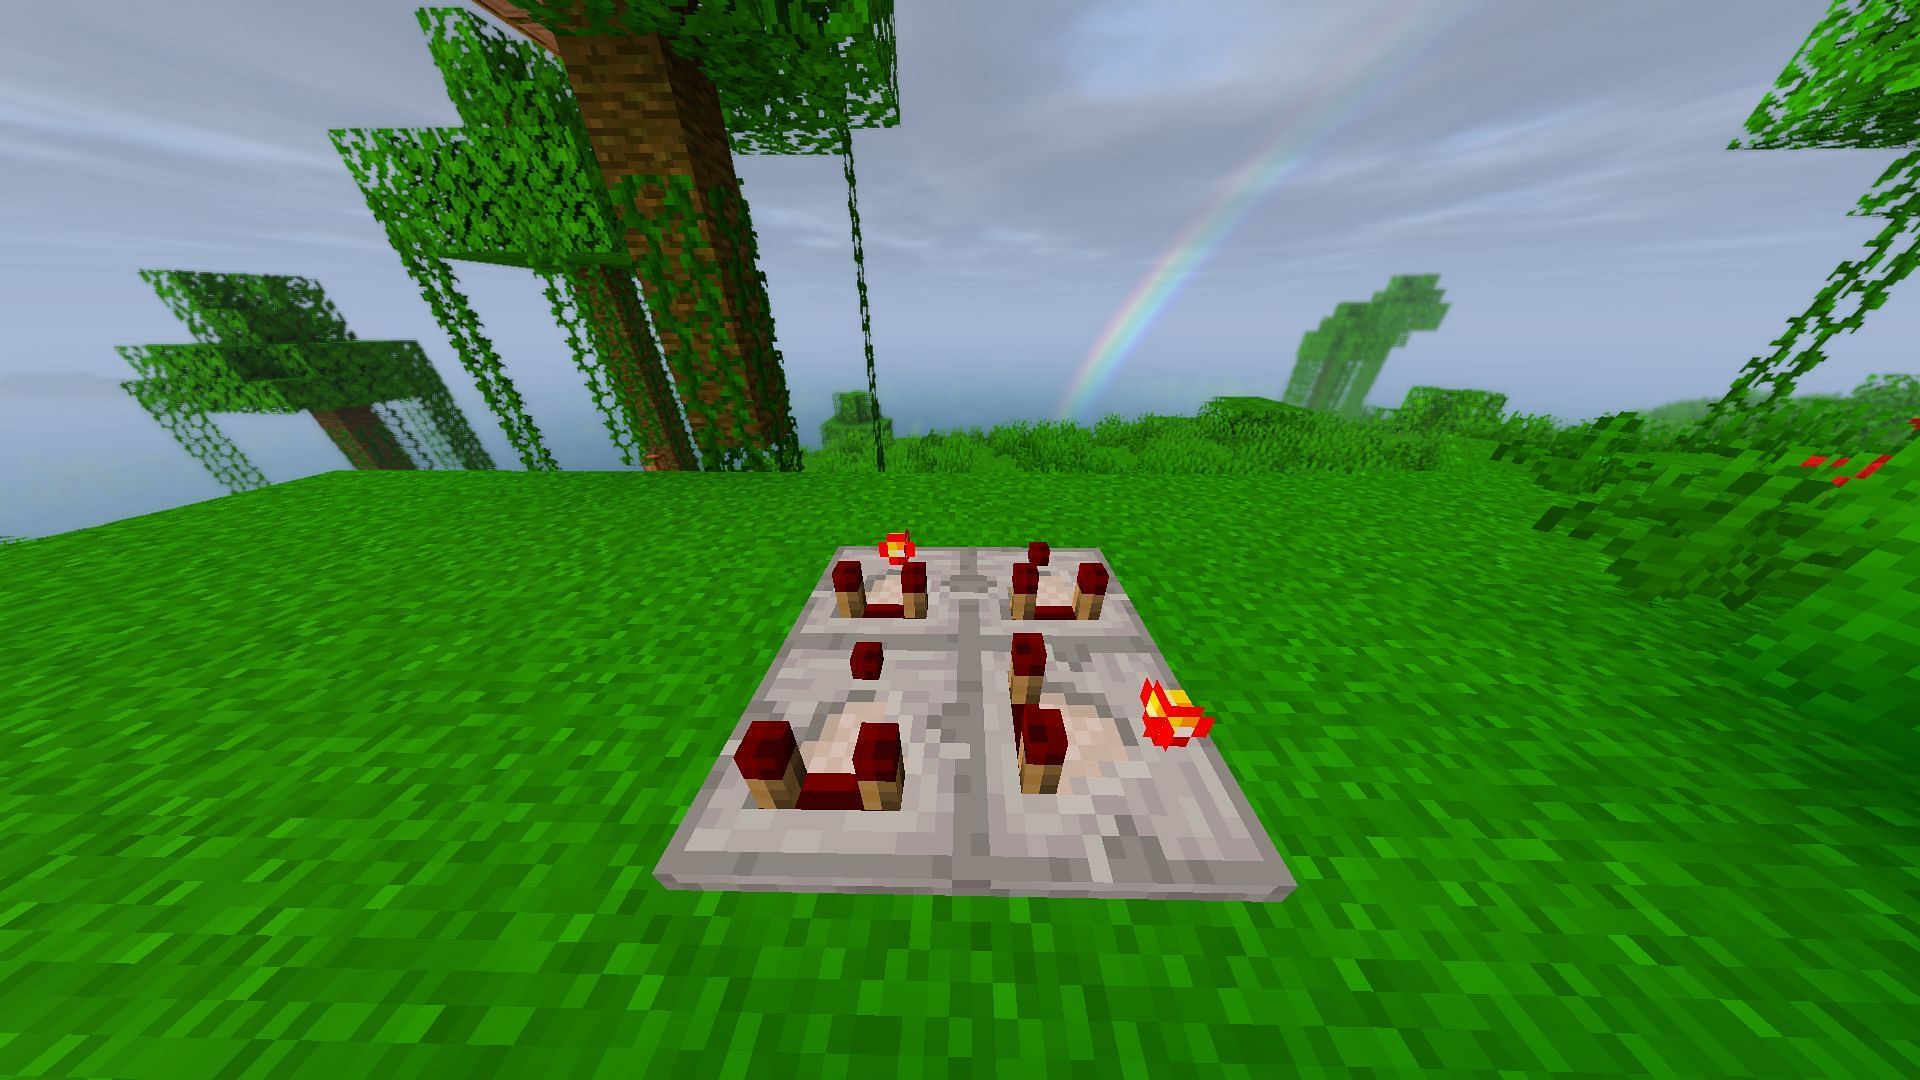 Four redstone comparators, with the frontal redstone torch turned on in two (Image via Minecraft)